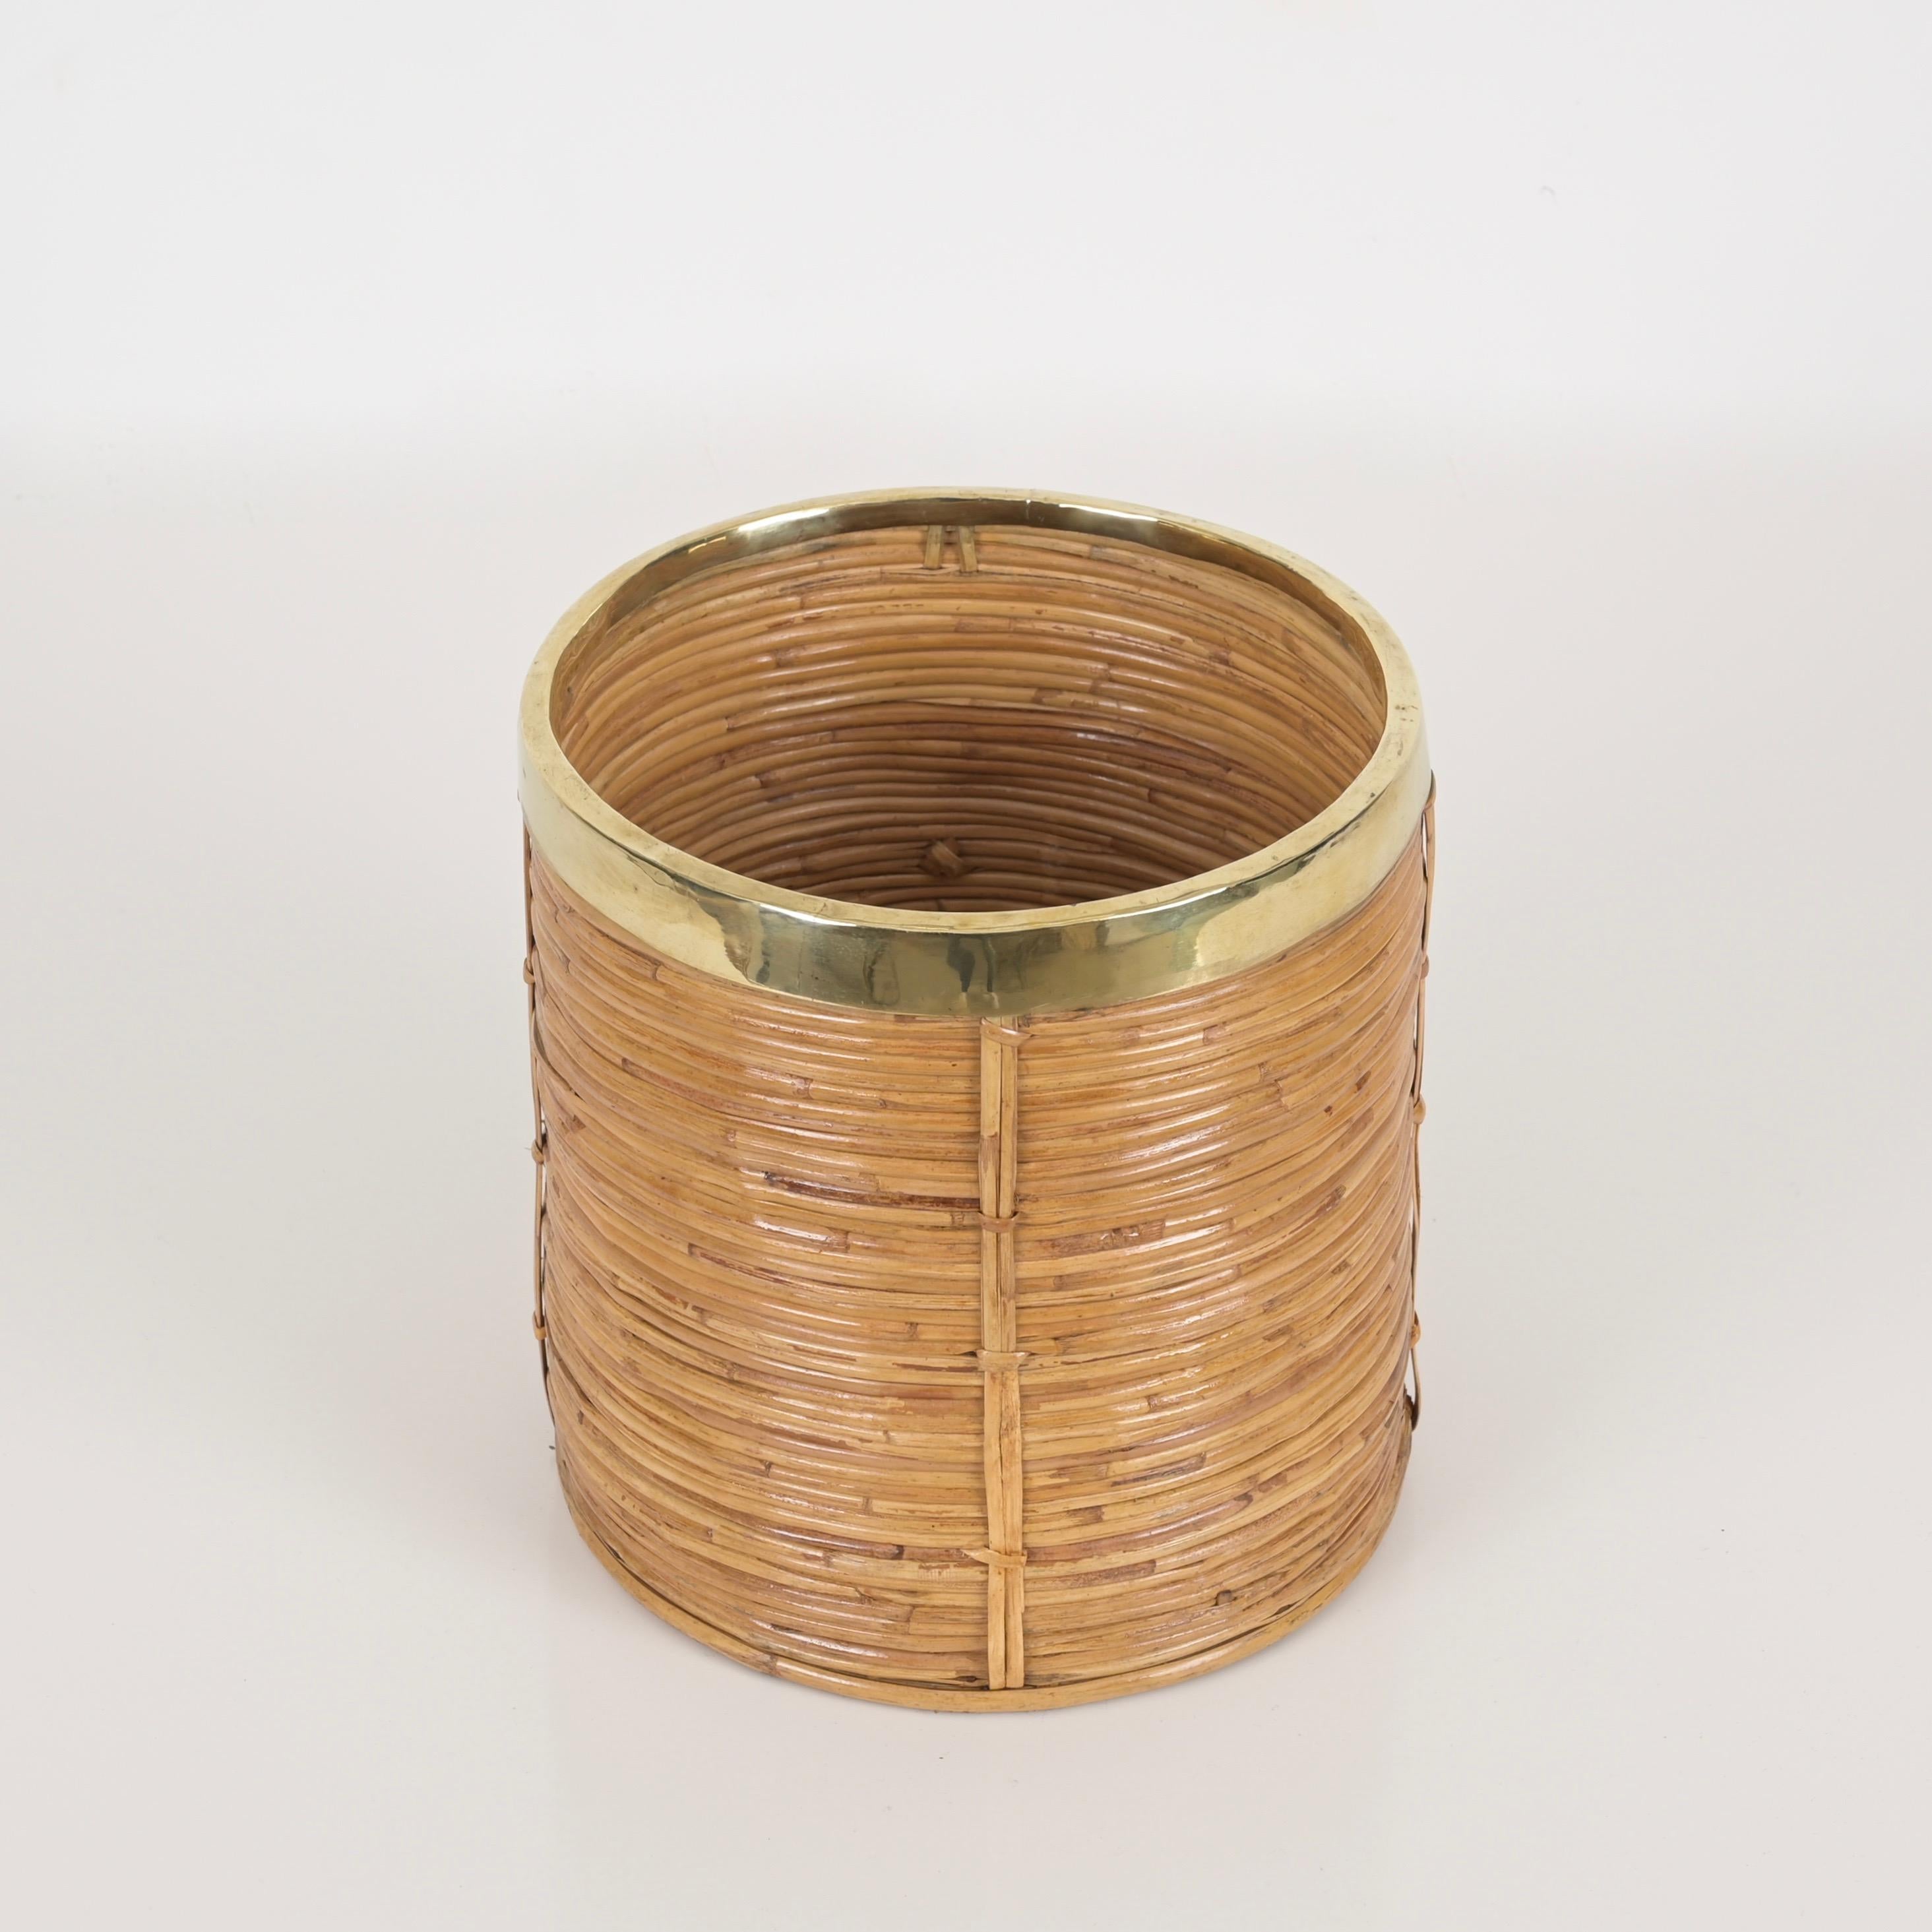 Beautiful decorative basket or planter fully made in curved rattan, wicker and brass. This lovely object is attributed to Vivai del Sud and made in Italy during the 1970s, clearly in the style of Gabriella Crespi.

This stunning round decorative